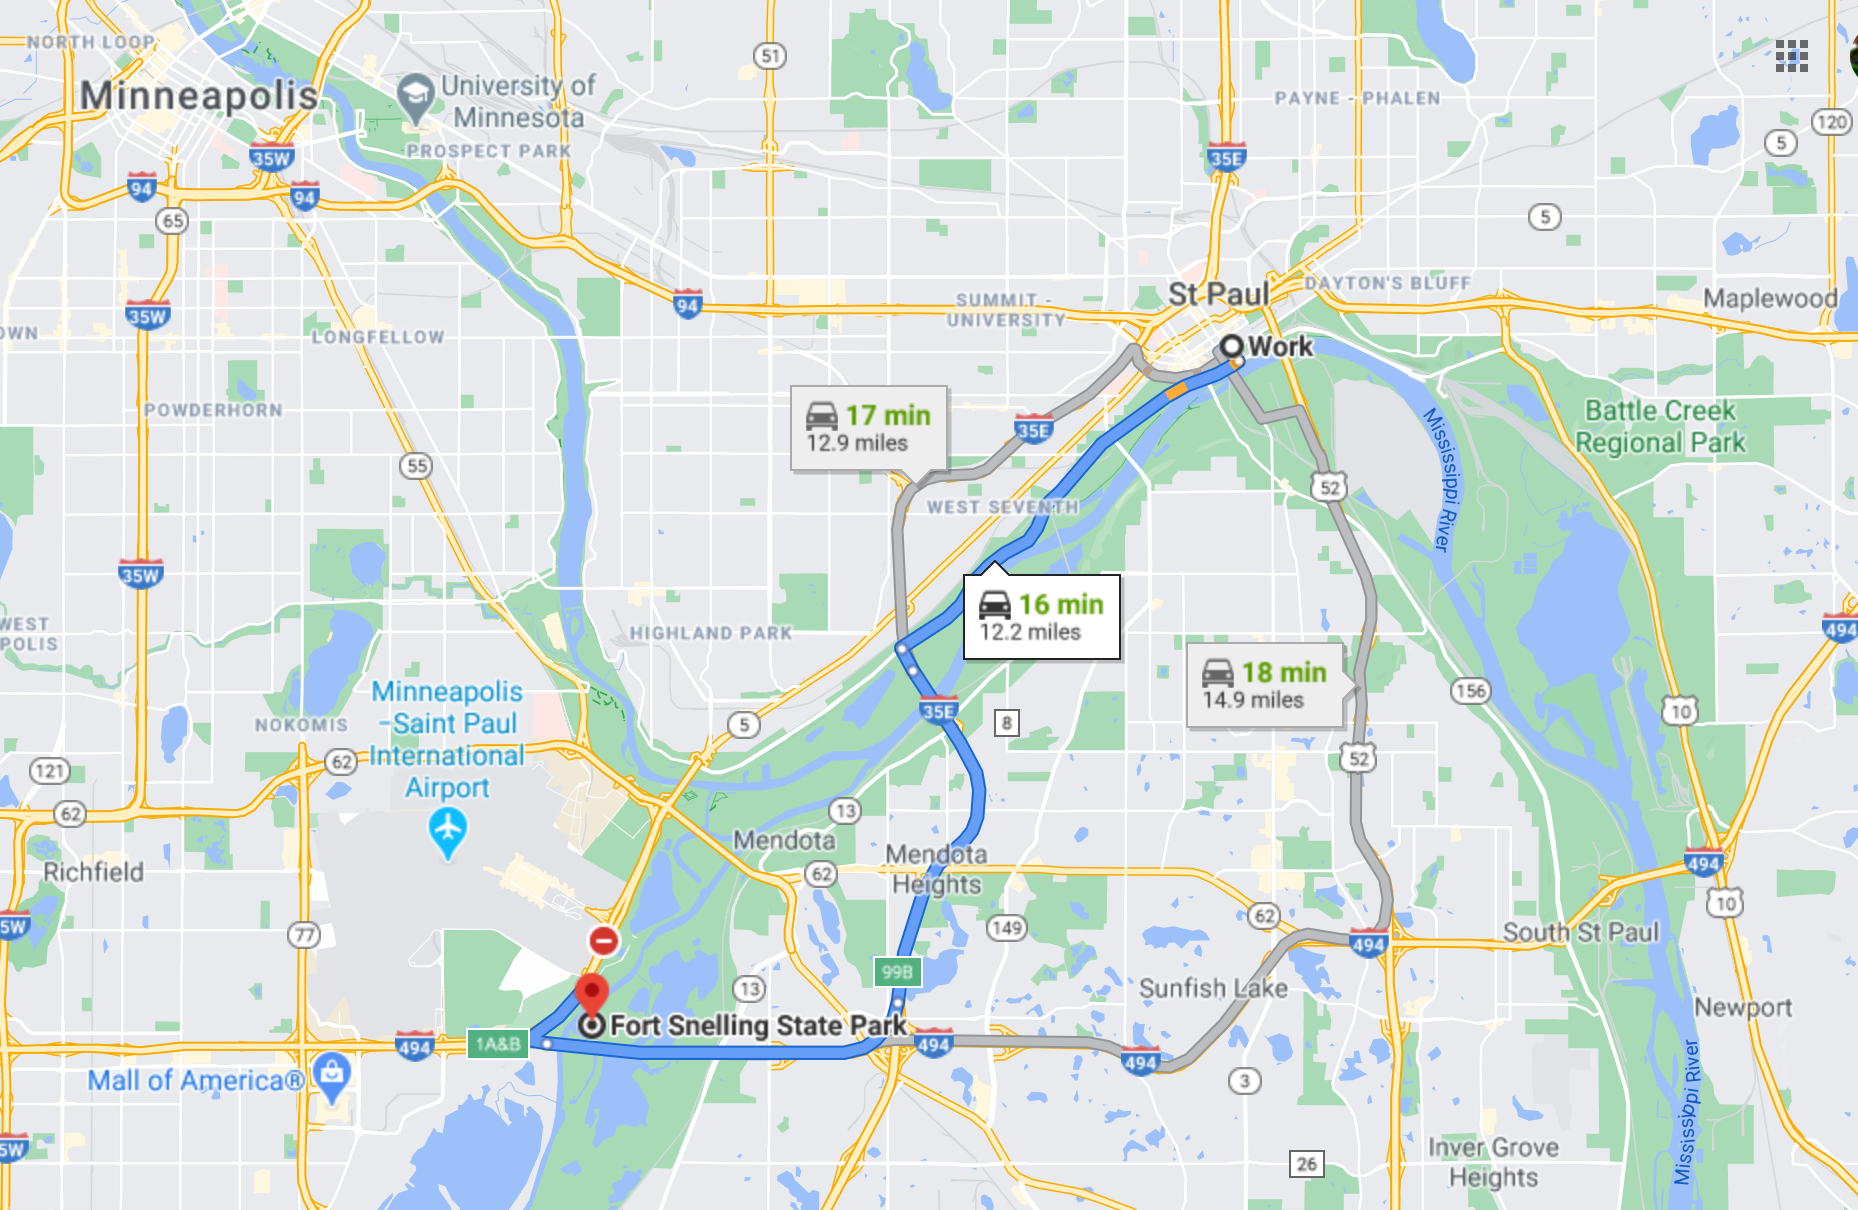 A Google map showing the routes from St. Paul to Fort Snelling State Park.